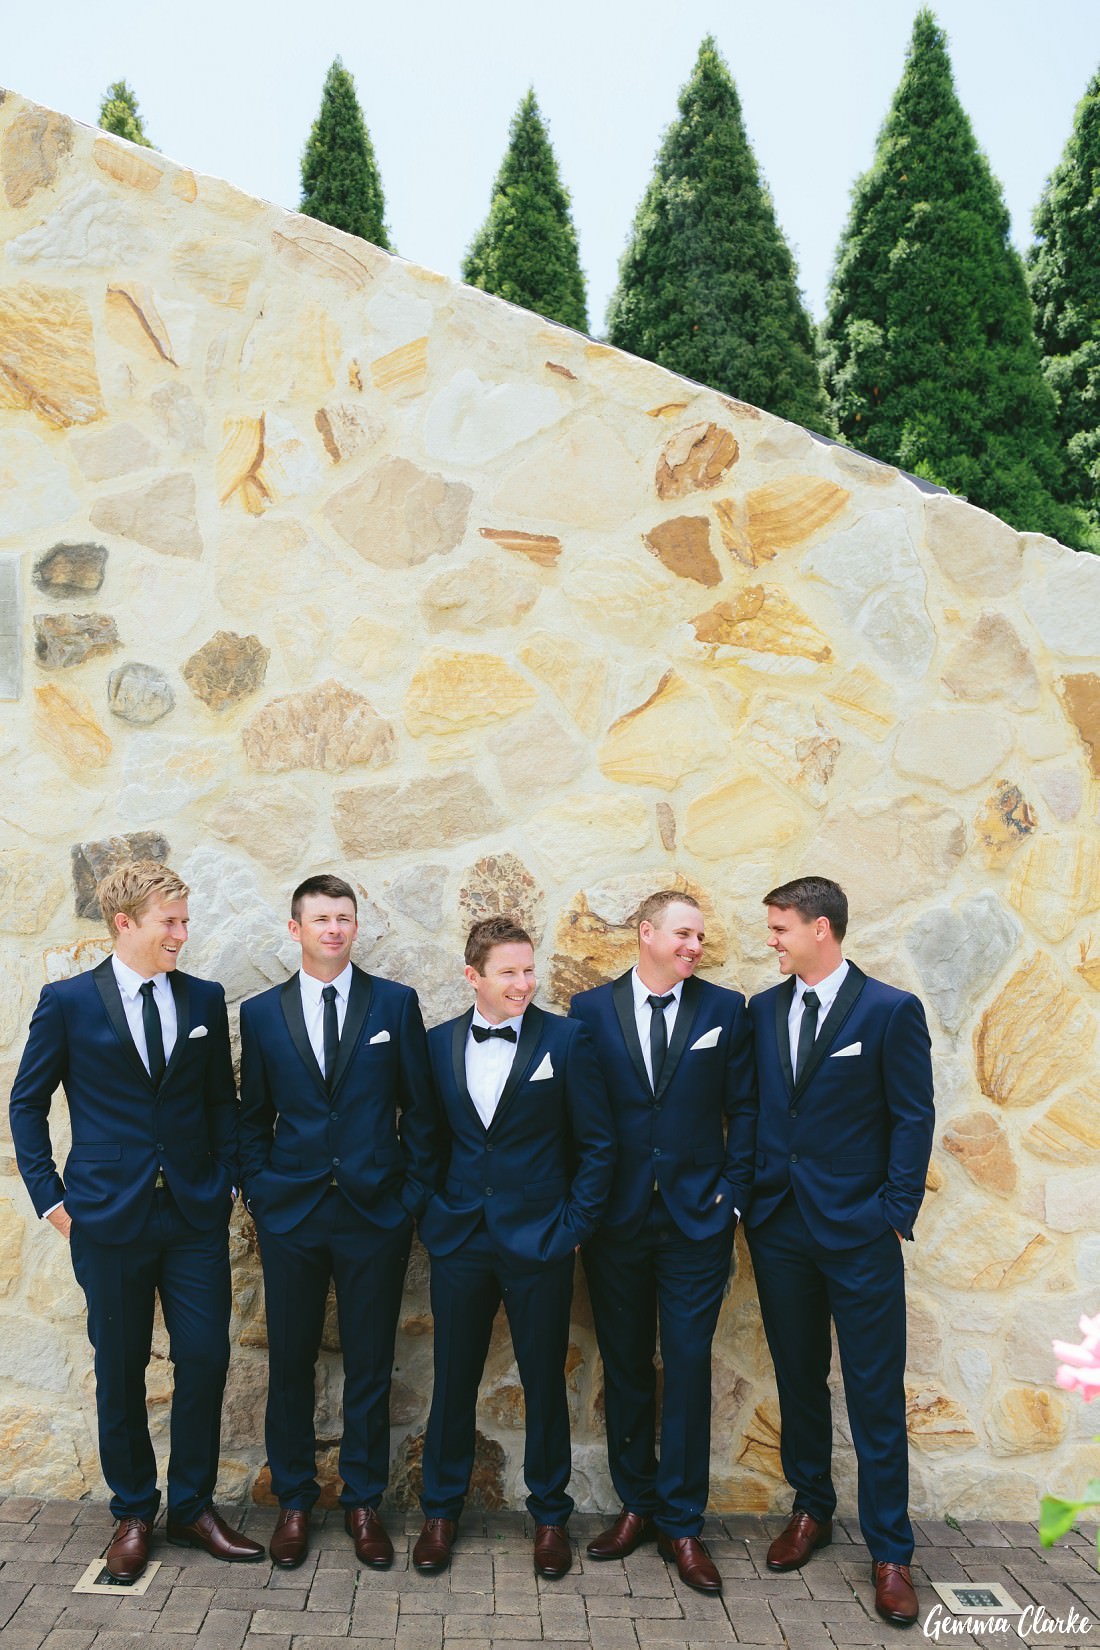 Groomsmen lined up in front of a beautiful sandstone wall with trees in the background at this Bendooley Estate Wedding